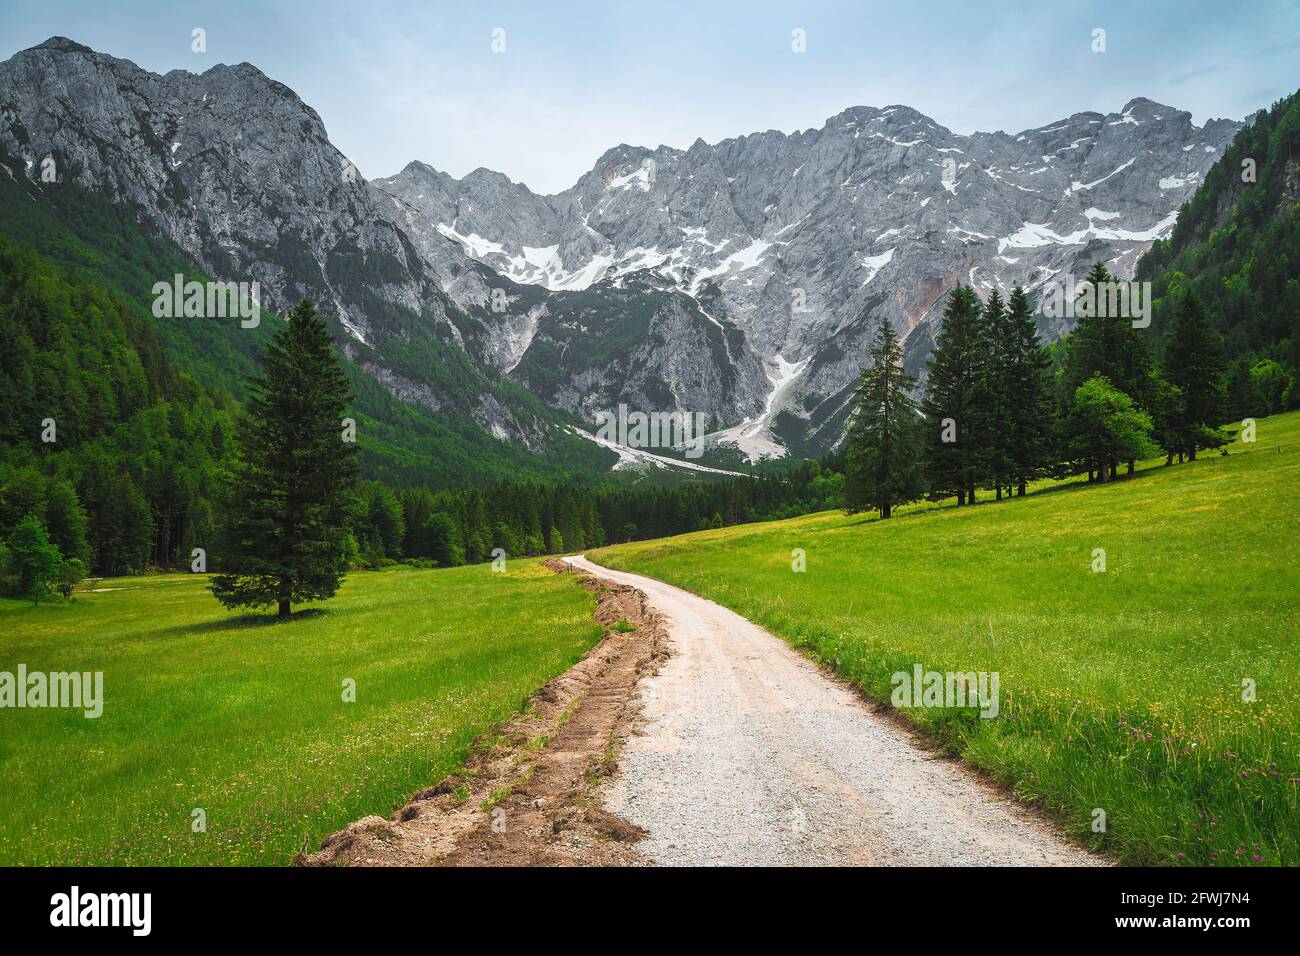 Amazing colorful summer flowery fields with pine forest and high snowy mountains in background, Jezersko valley, Kamnik Savinja Alps, Slovenia, Europe Stock Photo